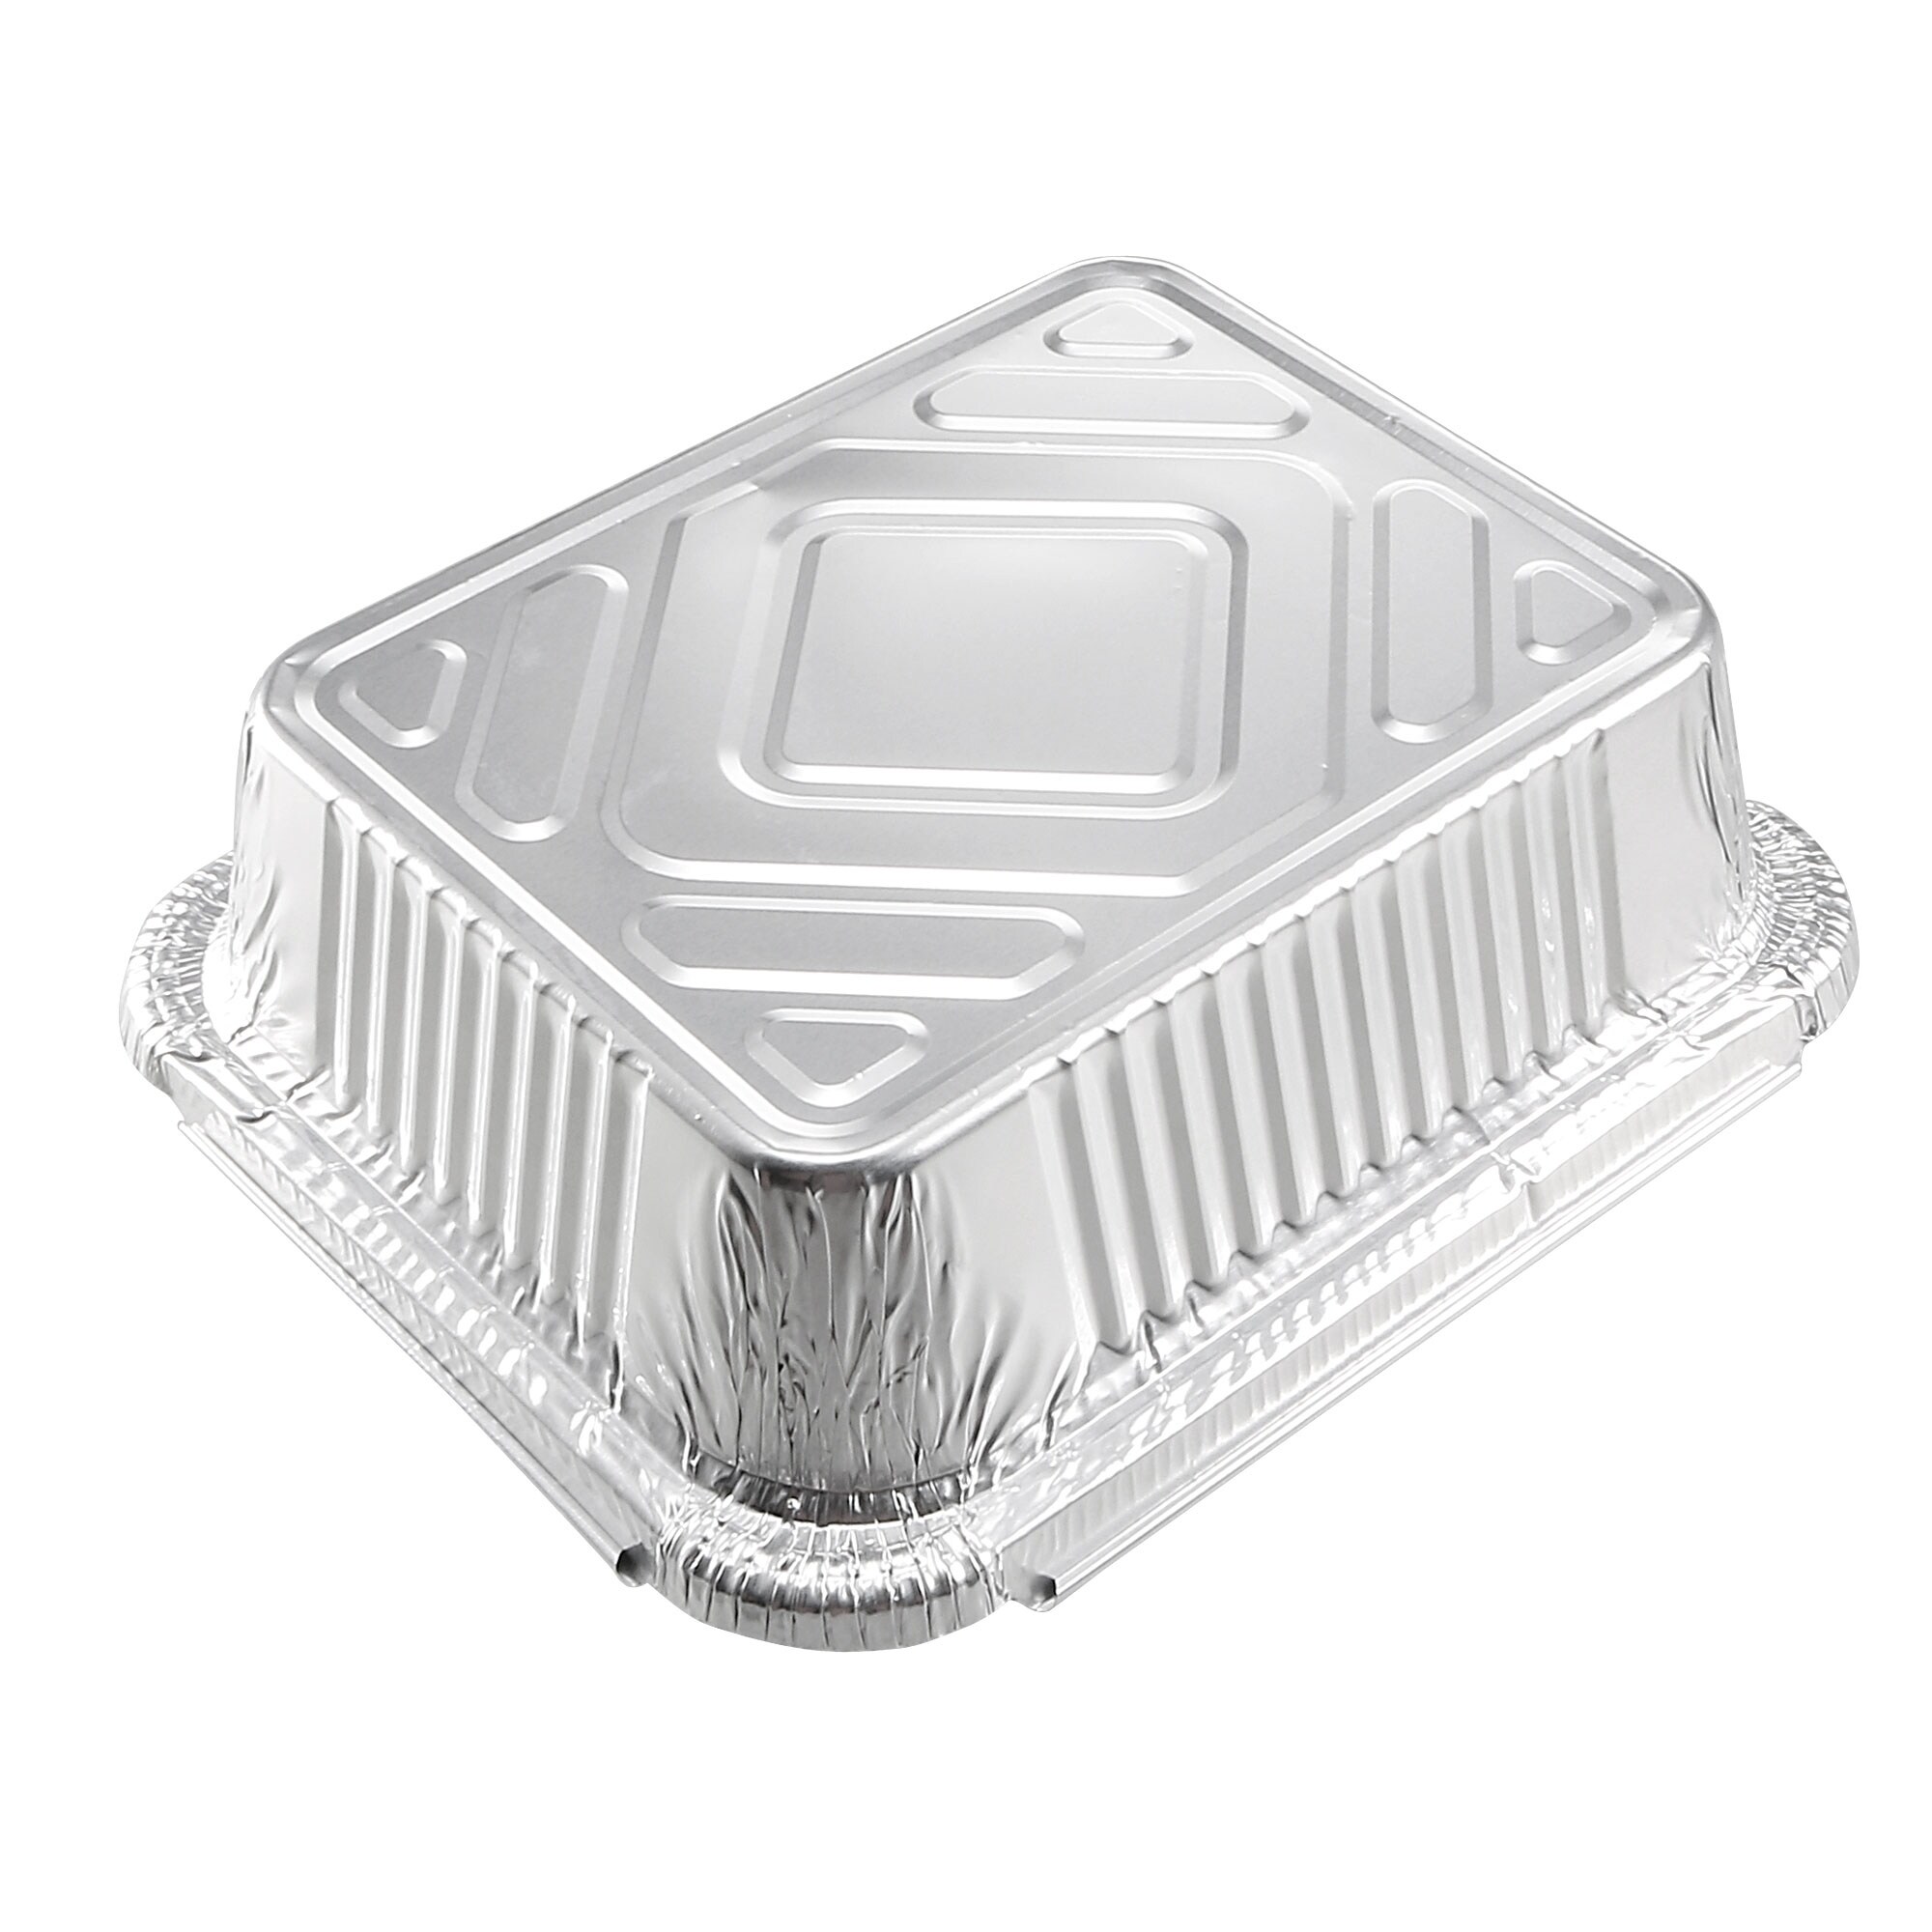 14 x 5.5 Aluminum Foil Pans, Disposable Trays Containers for Baking - Bed  Bath & Beyond - 36190284